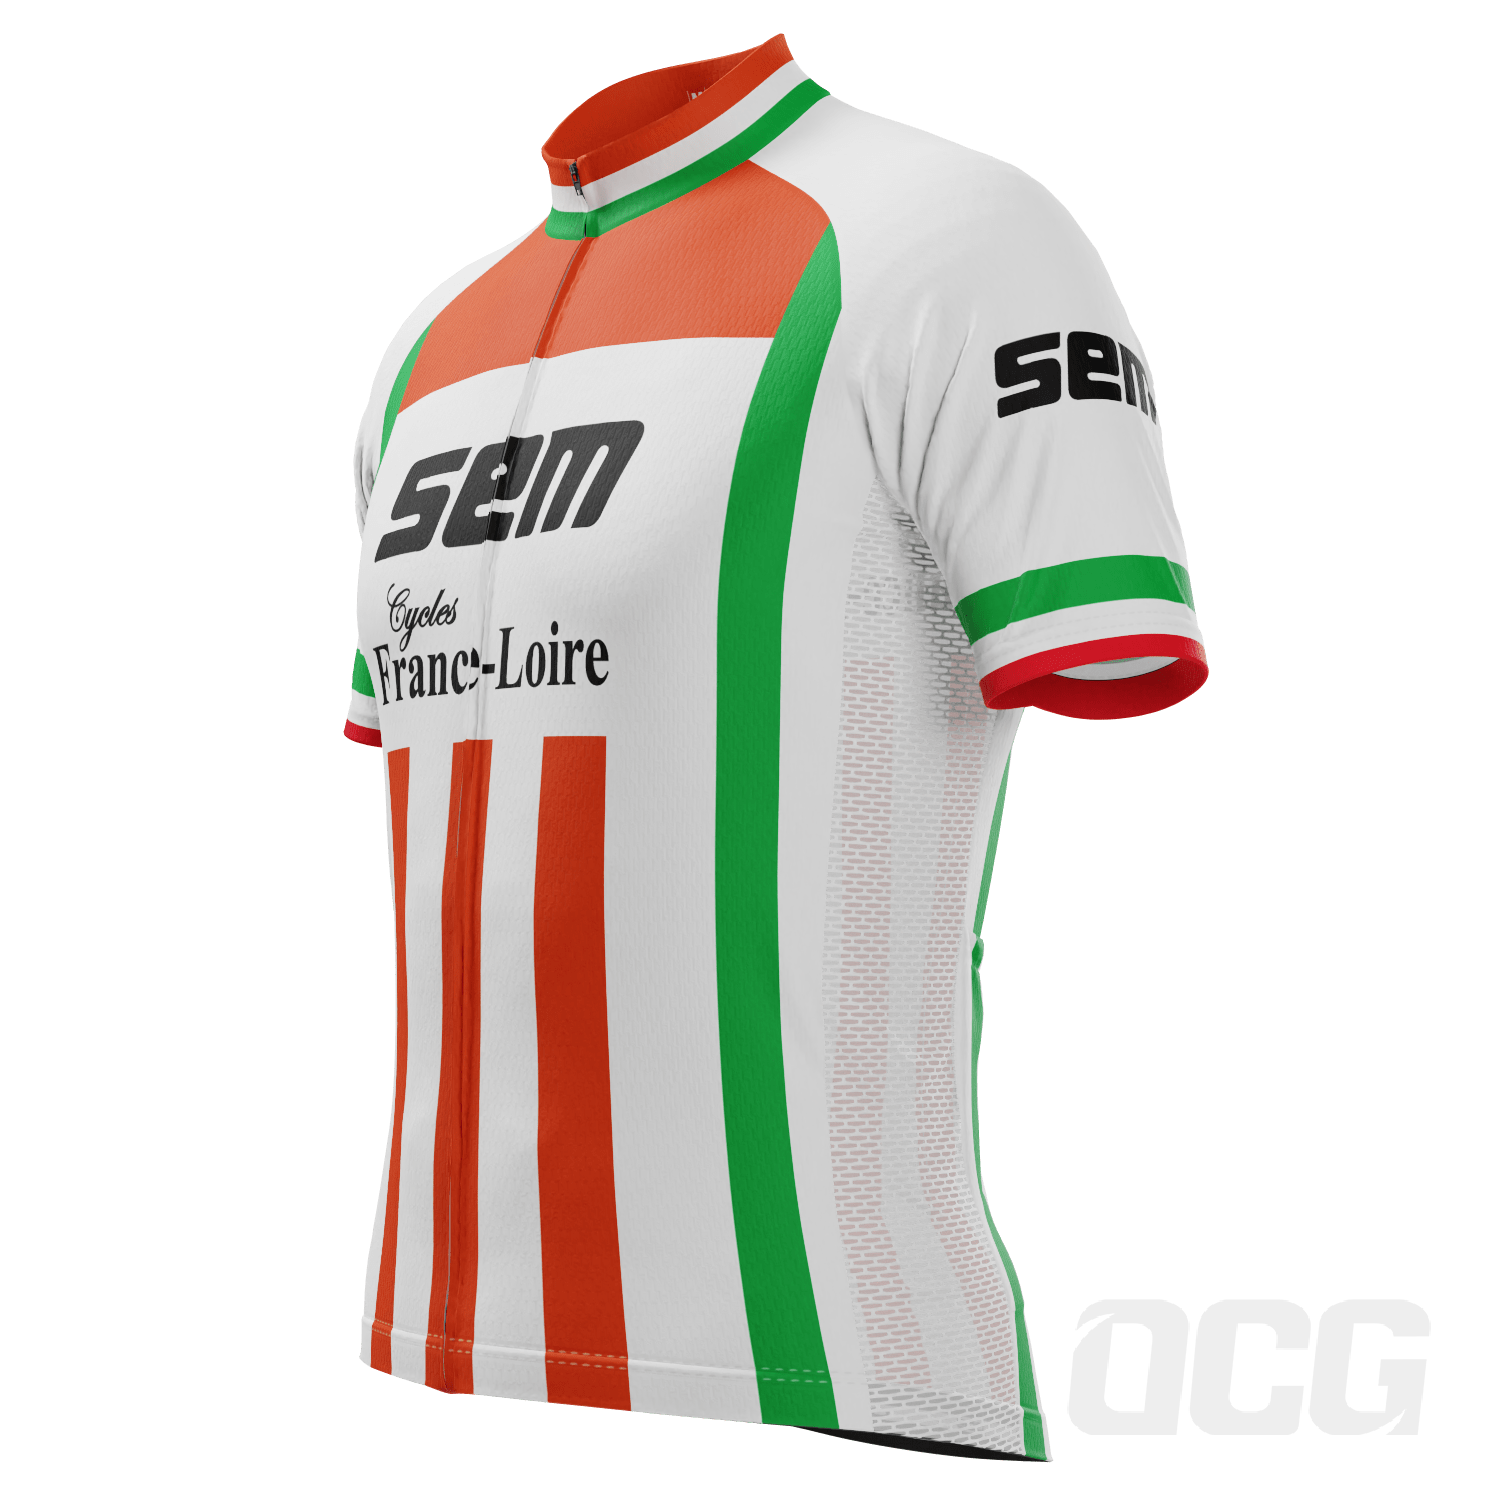 Retro Sem Cycles France Loire Cycling Jersey